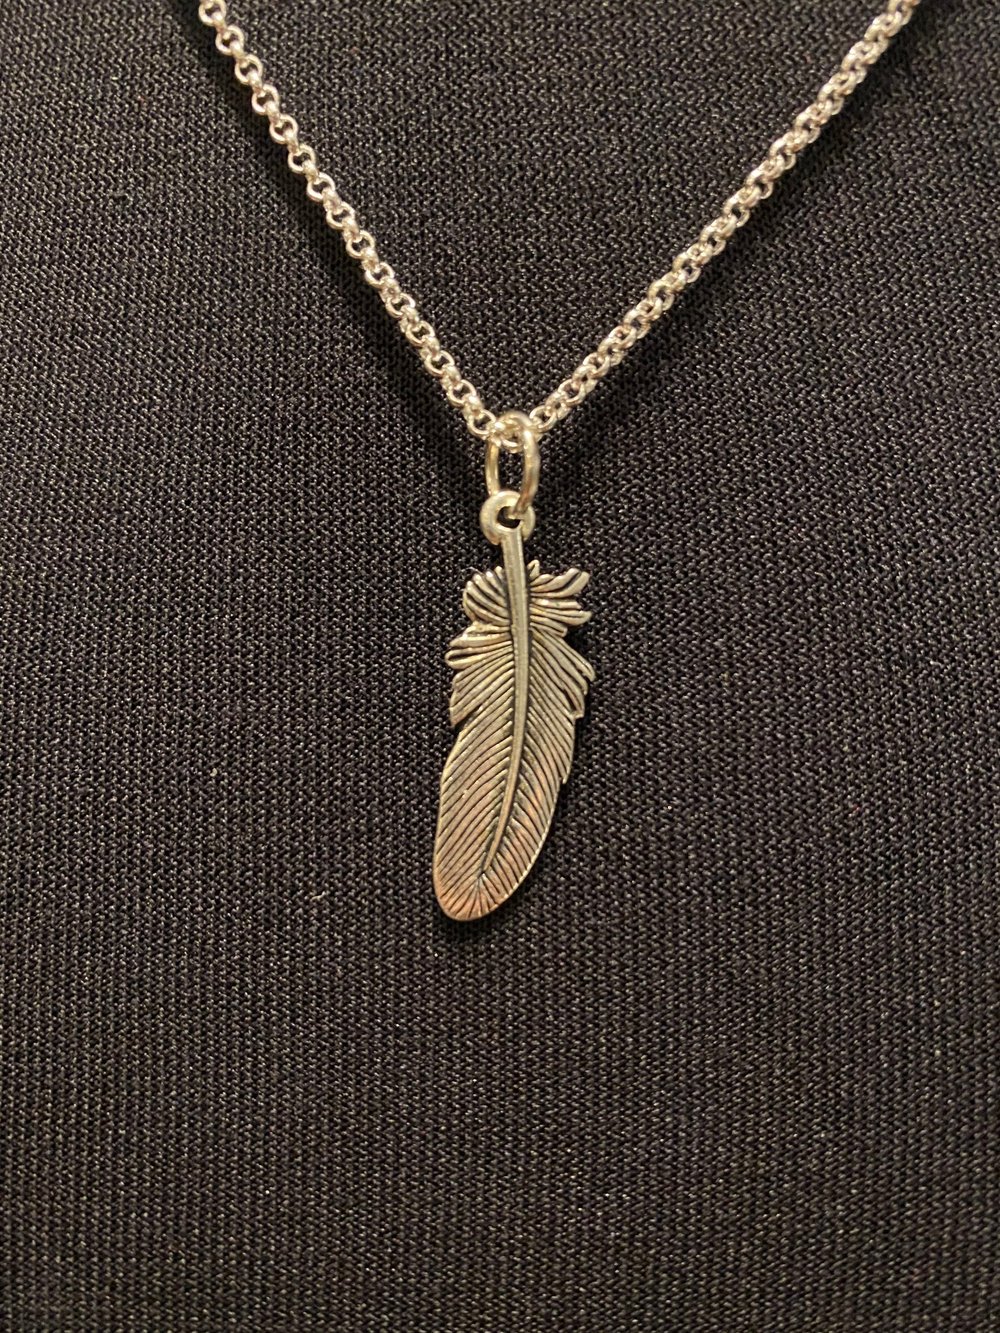 Silver Feather and Chain Necklace